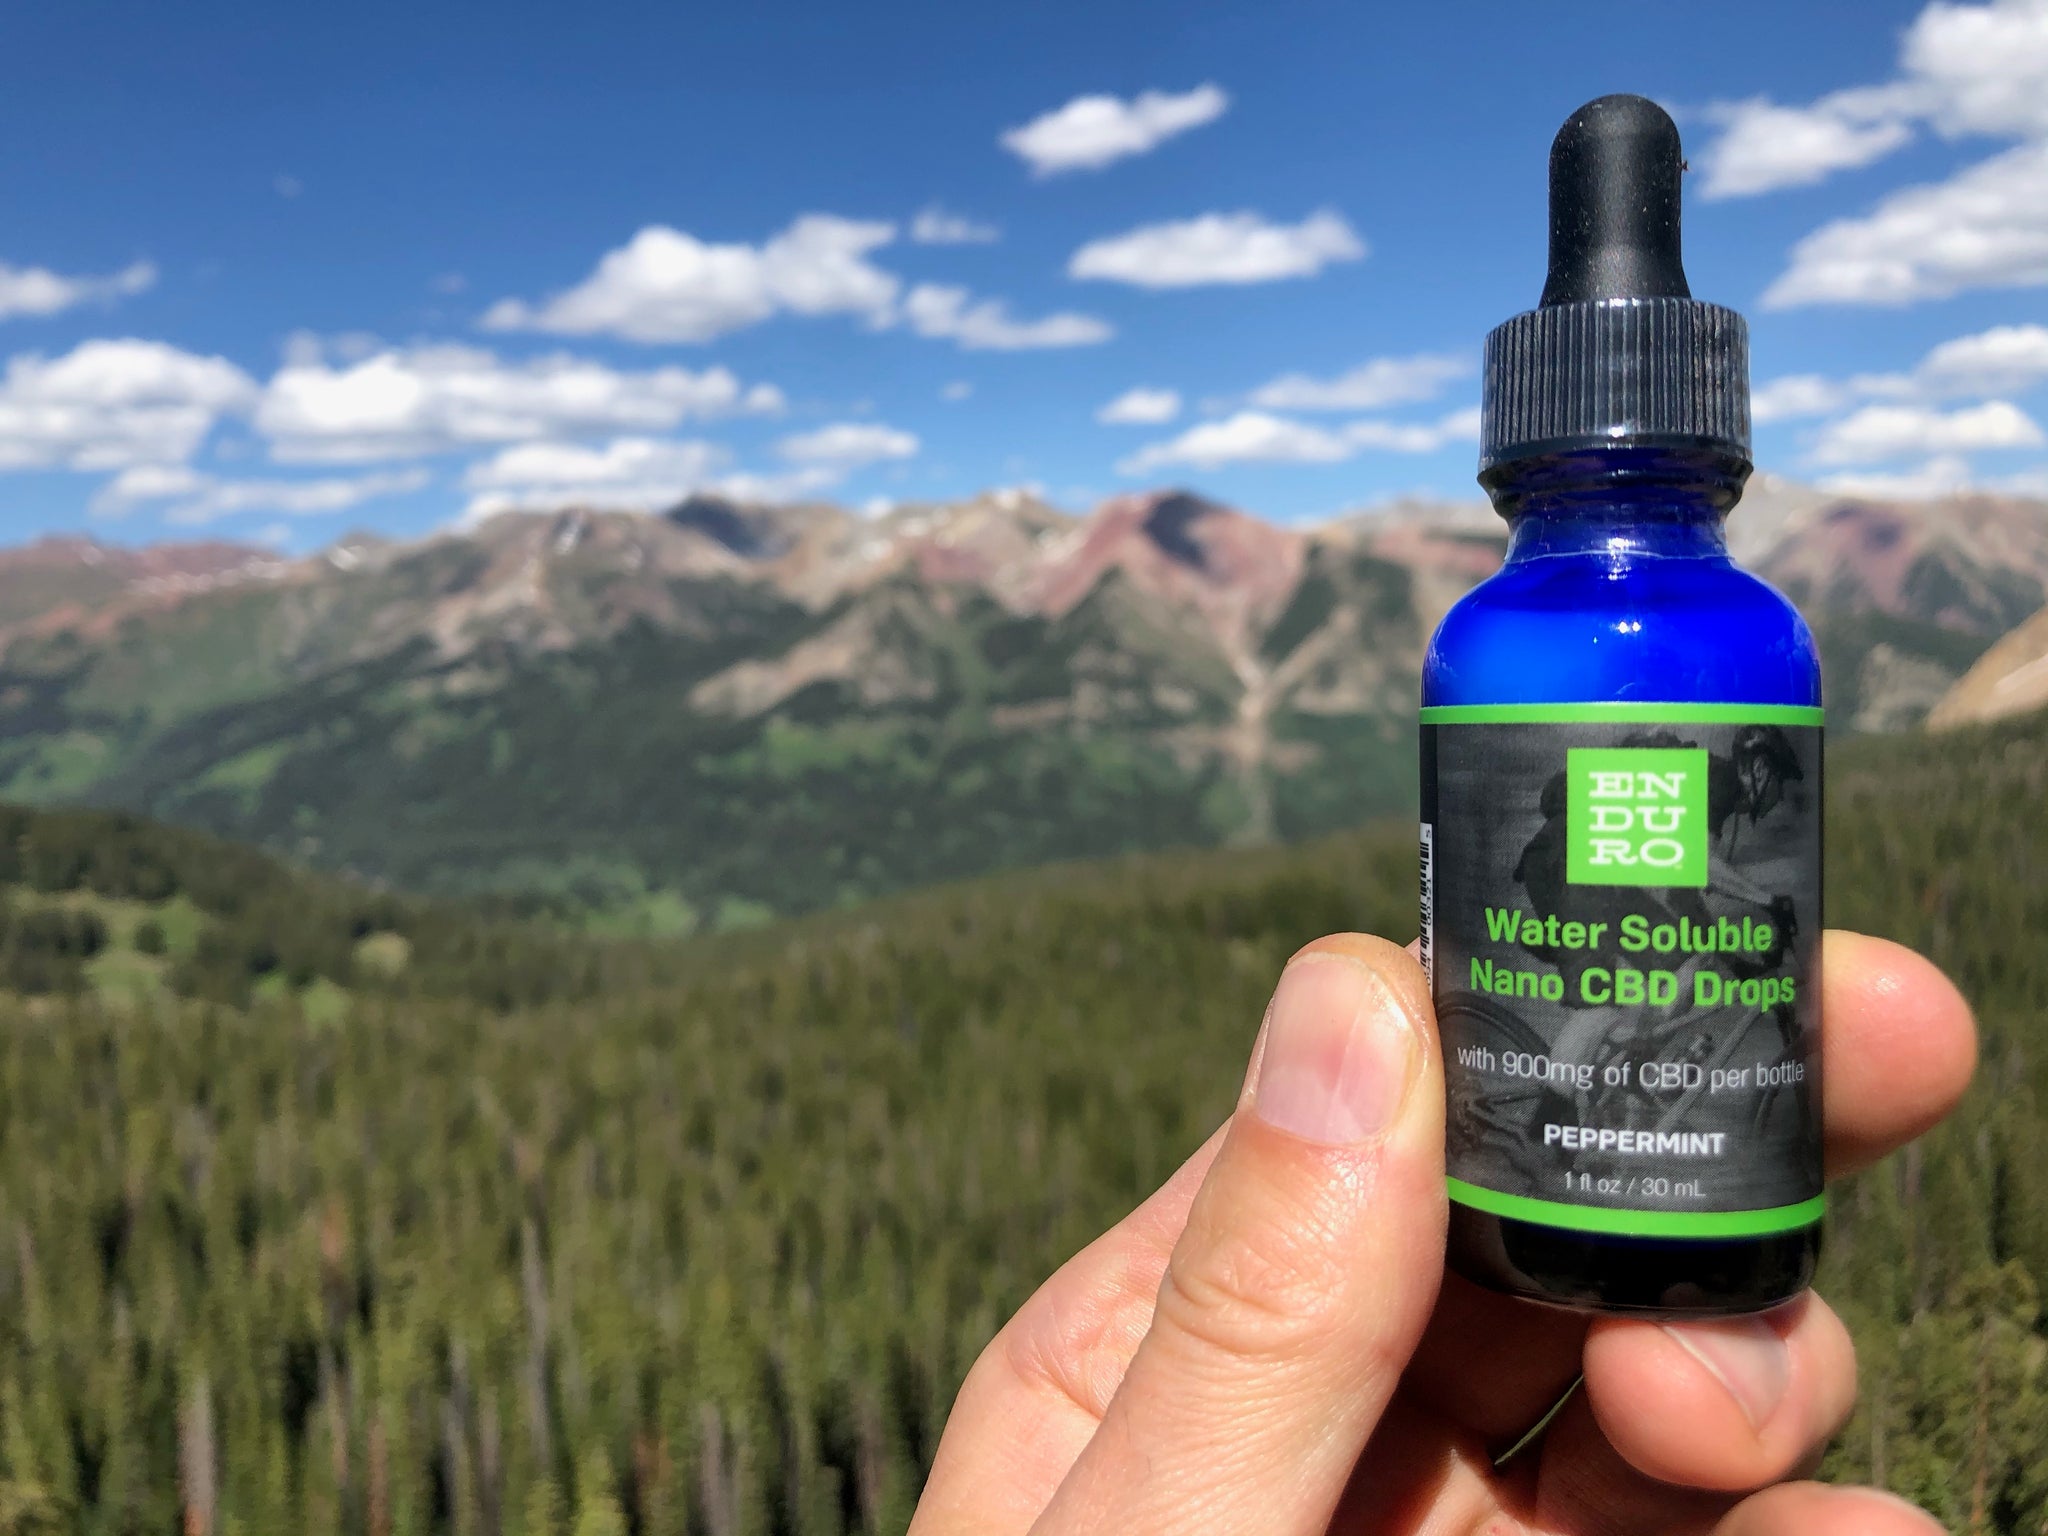 Nano CBD Drops: From Milky to Clear